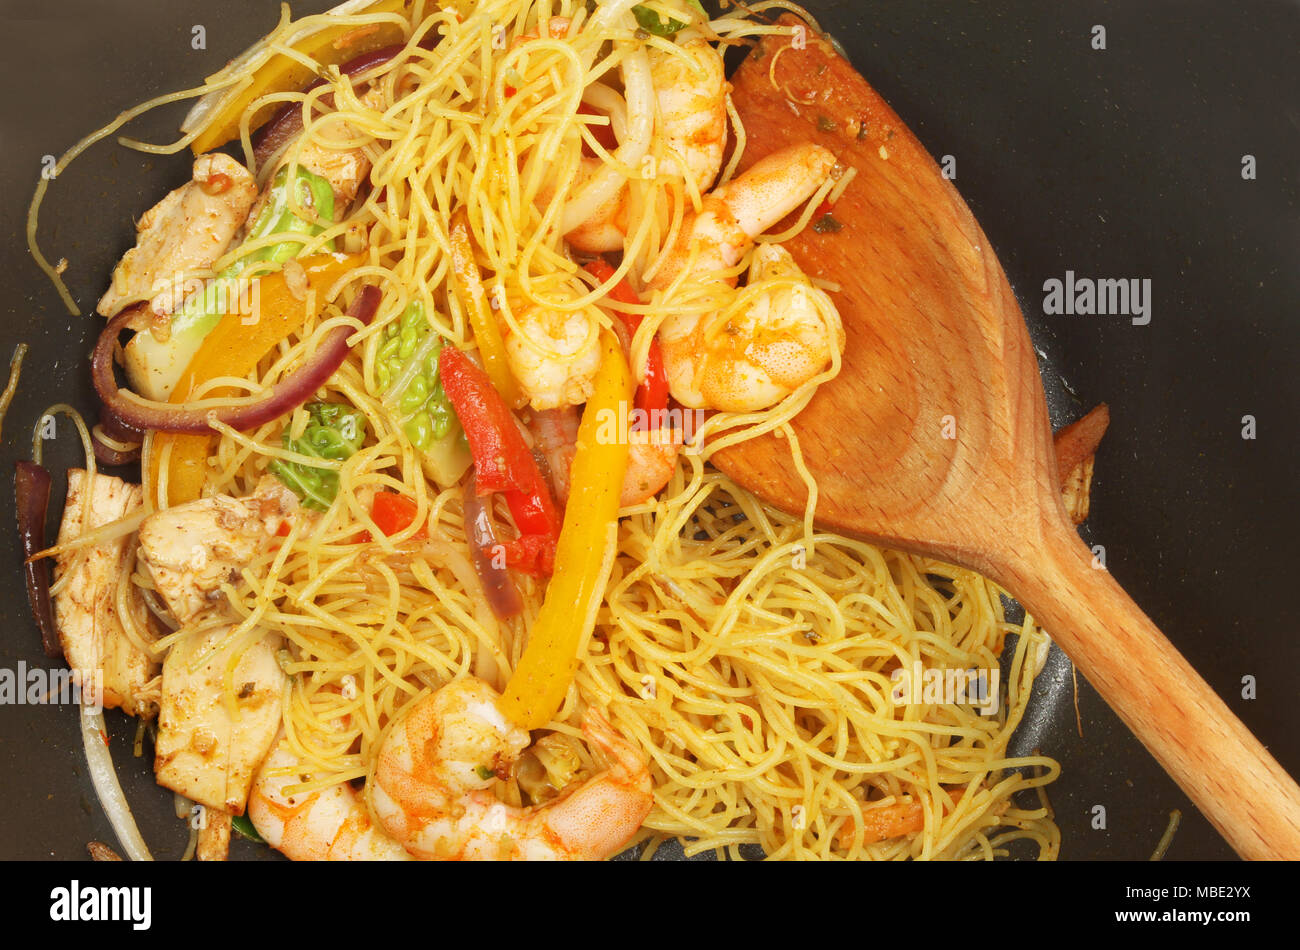 Closeup of a noodle chicken and prawn stir fry with a wooden spoon in a wok Stock Photo